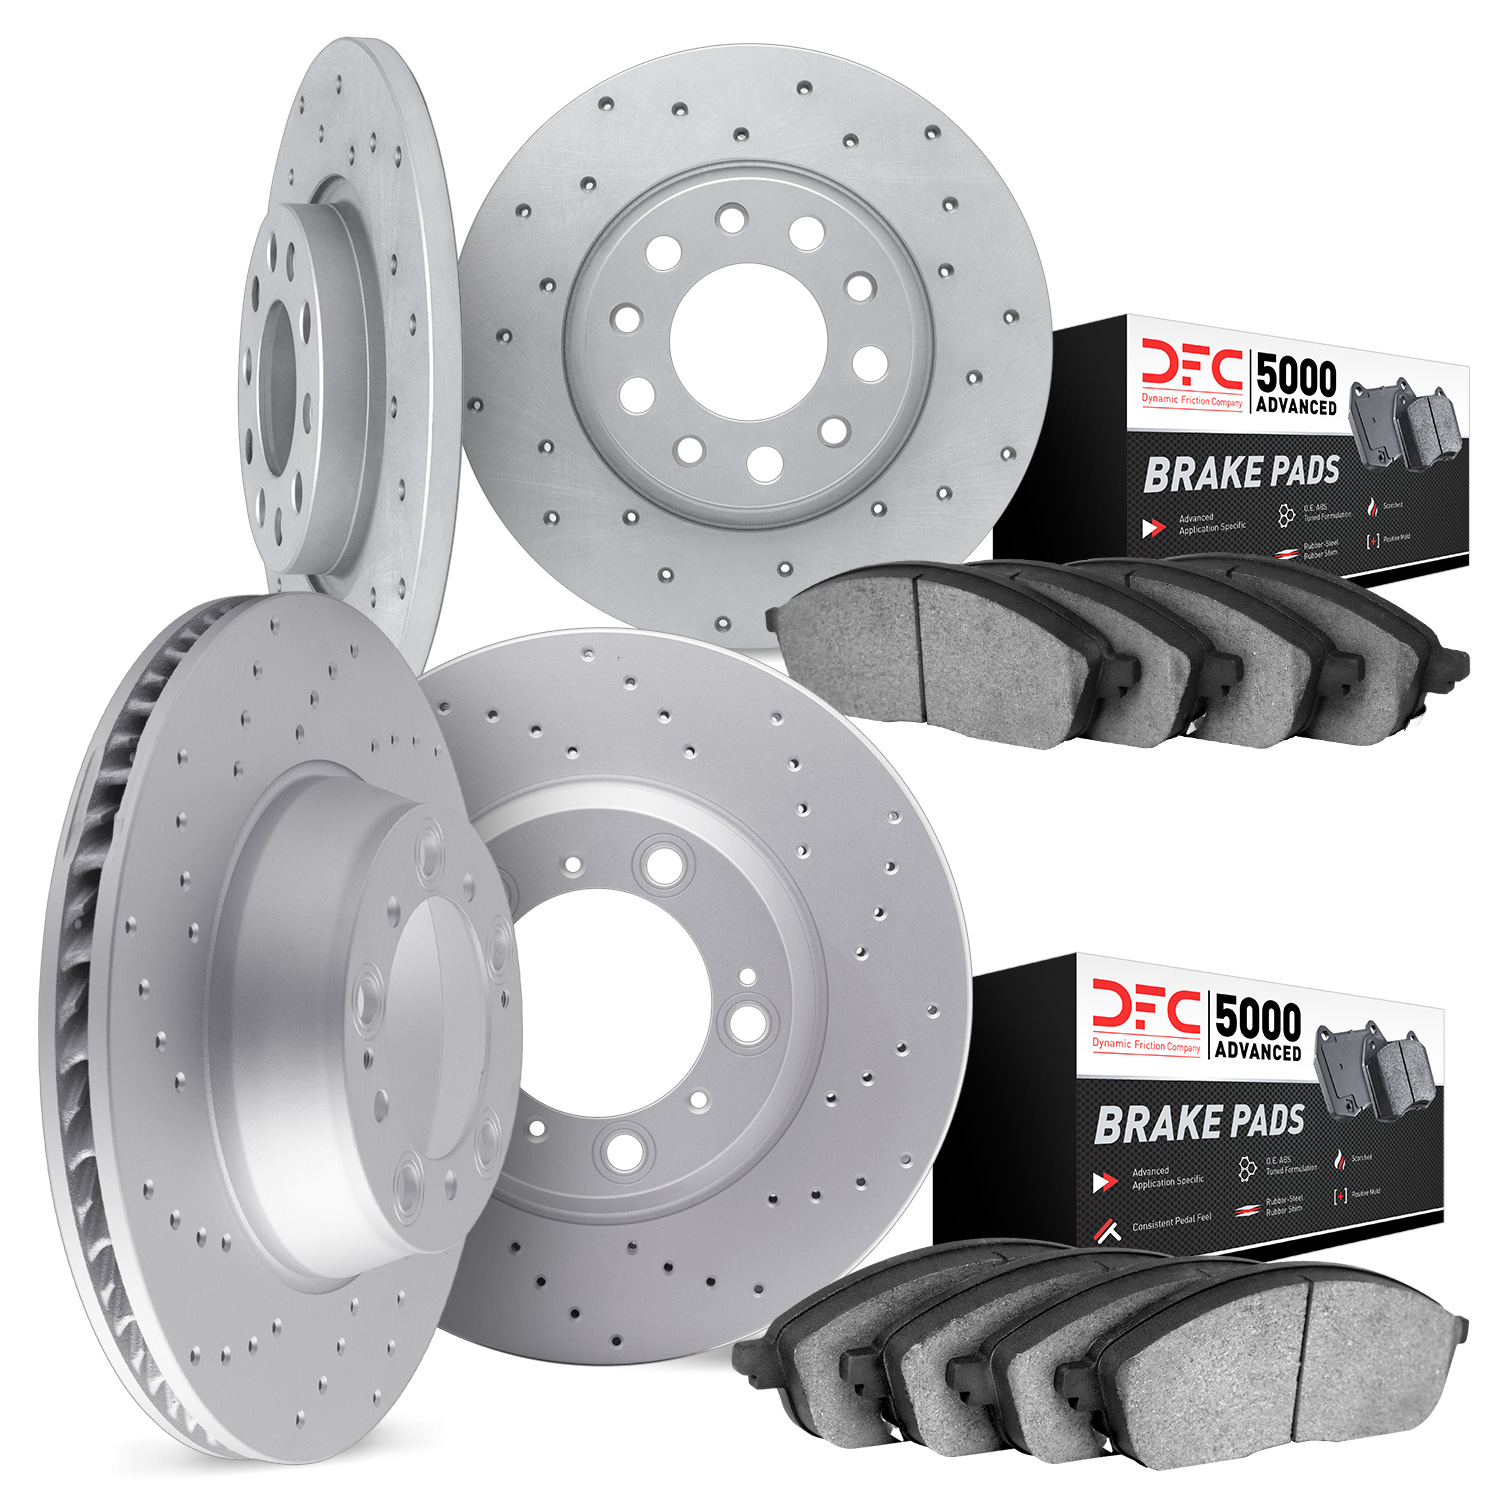 2704-59023 Geoperformance Drilled Brake Rotors with Active Performance Pads Kit, 2006-2011 Acura/Honda, Position: Front and Rear